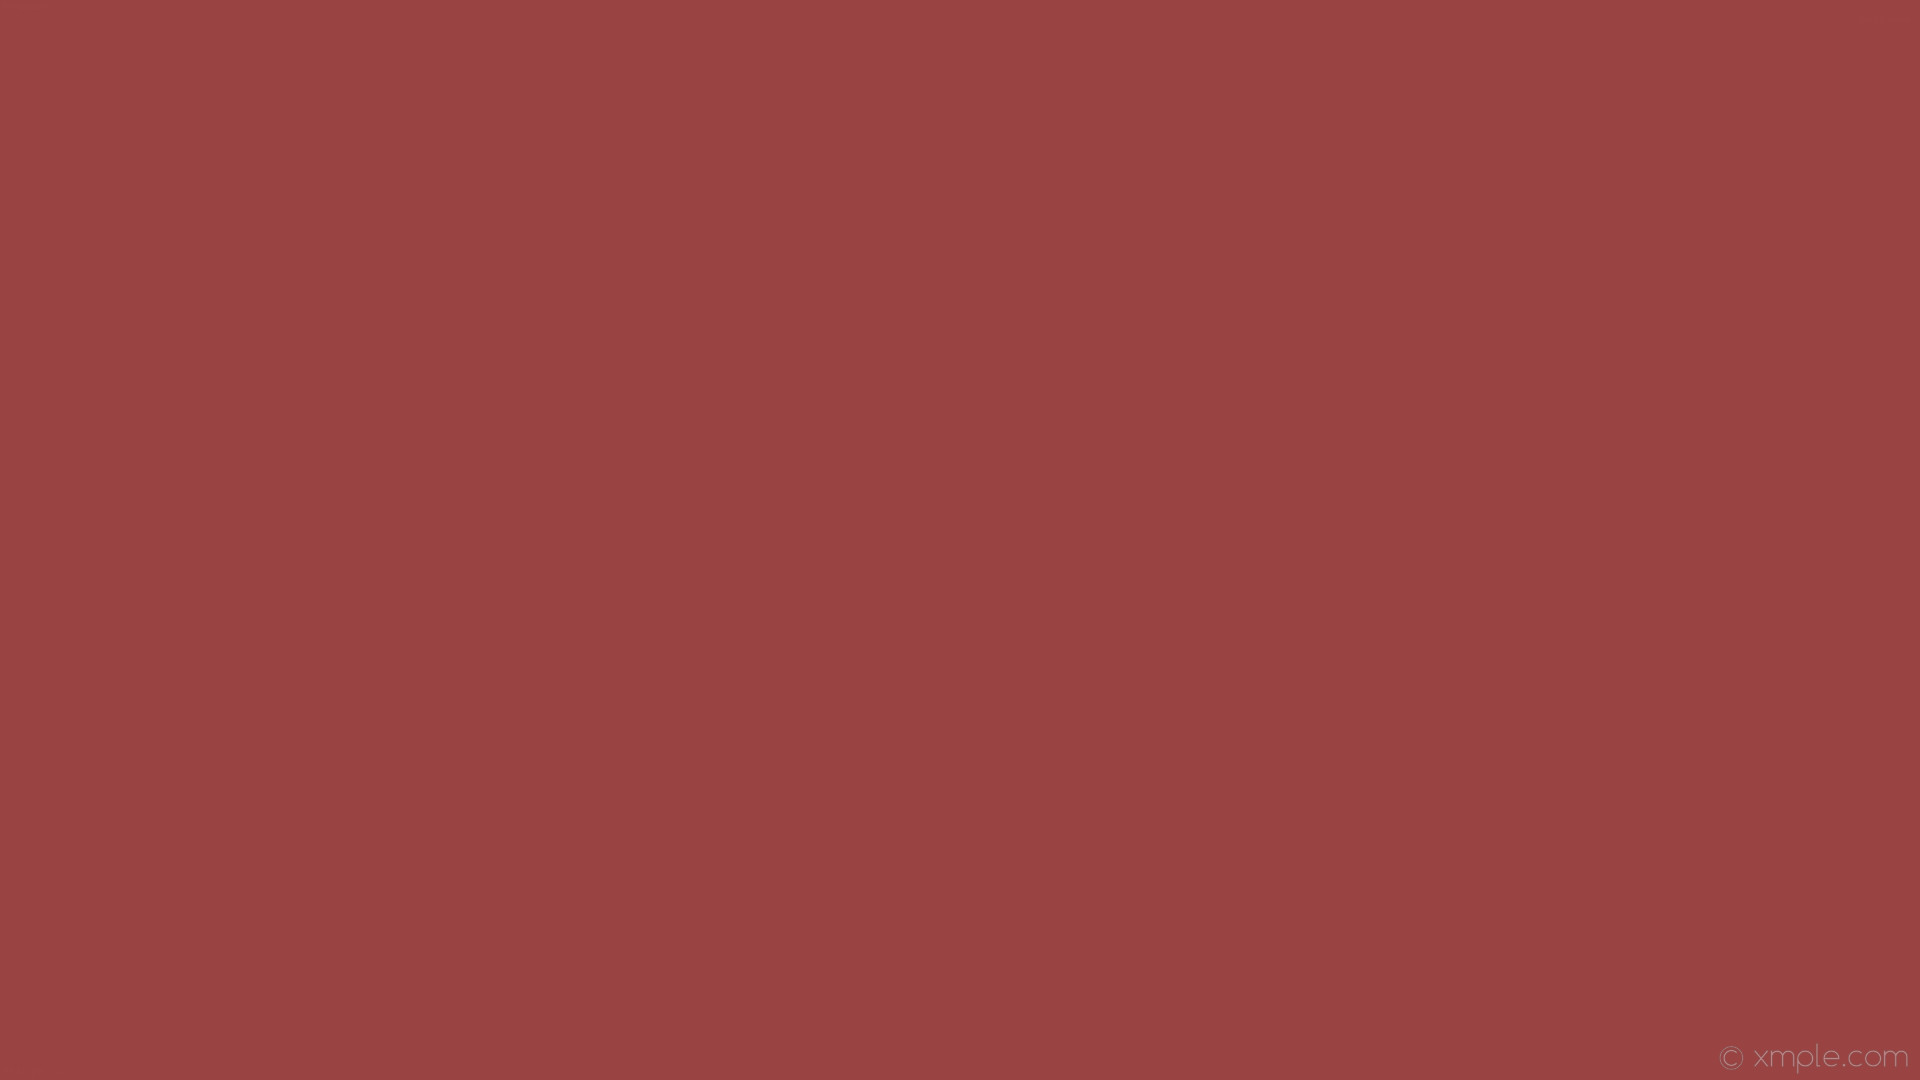 1920x1080 wallpaper plain single red one colour solid color #994443